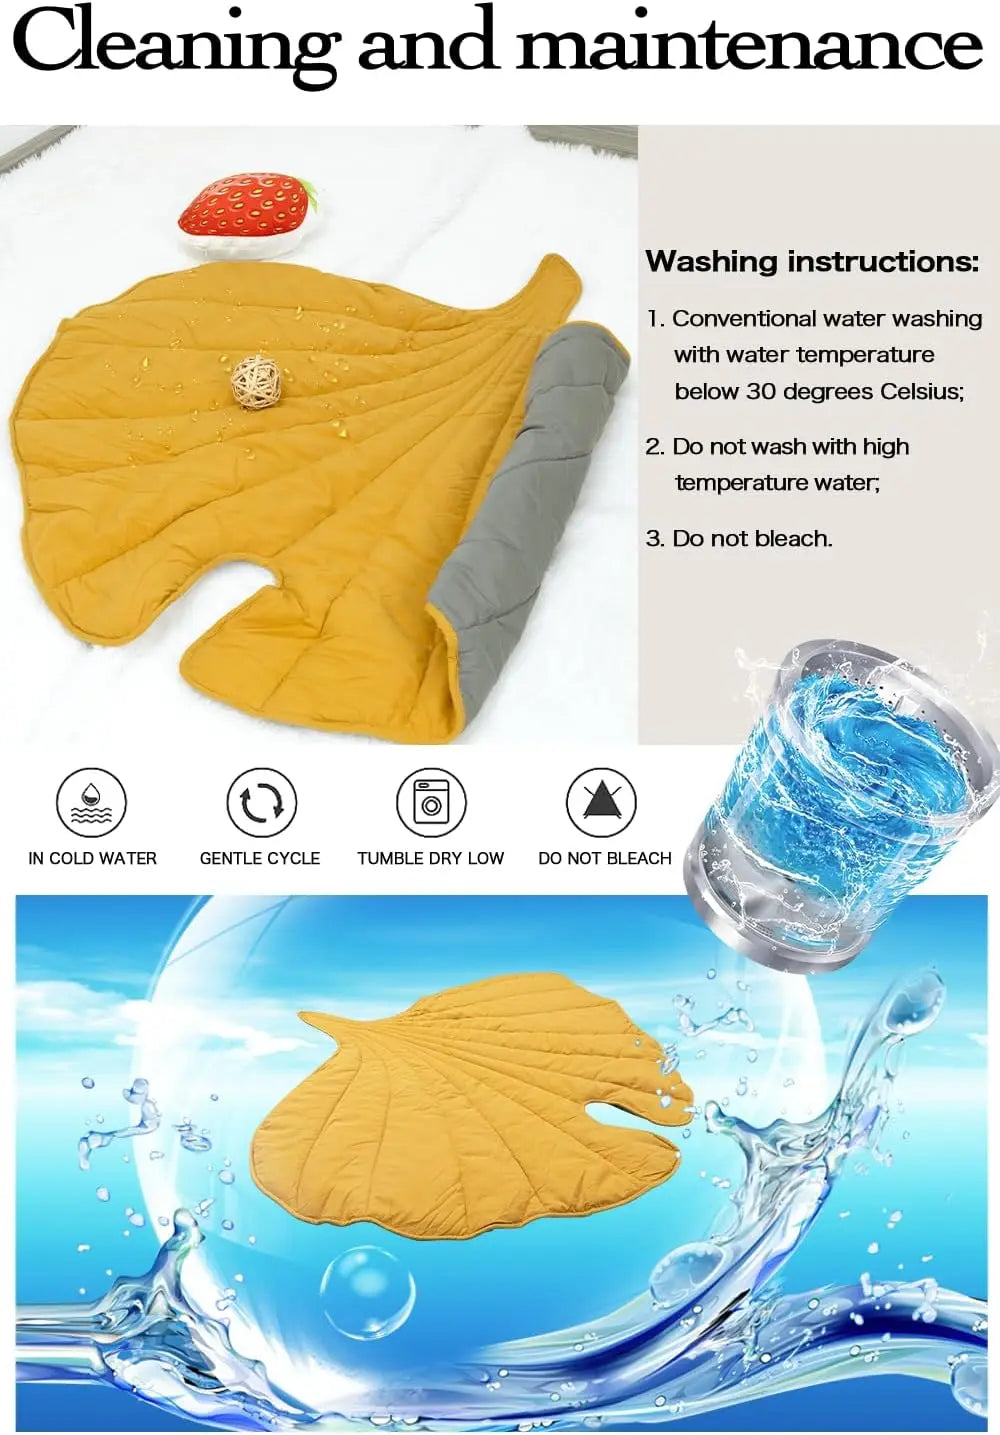 Reversible Leaf-Shaped Pet Mat - Soft, Washable Cotton Bed for Dogs & Cats - vippet.org